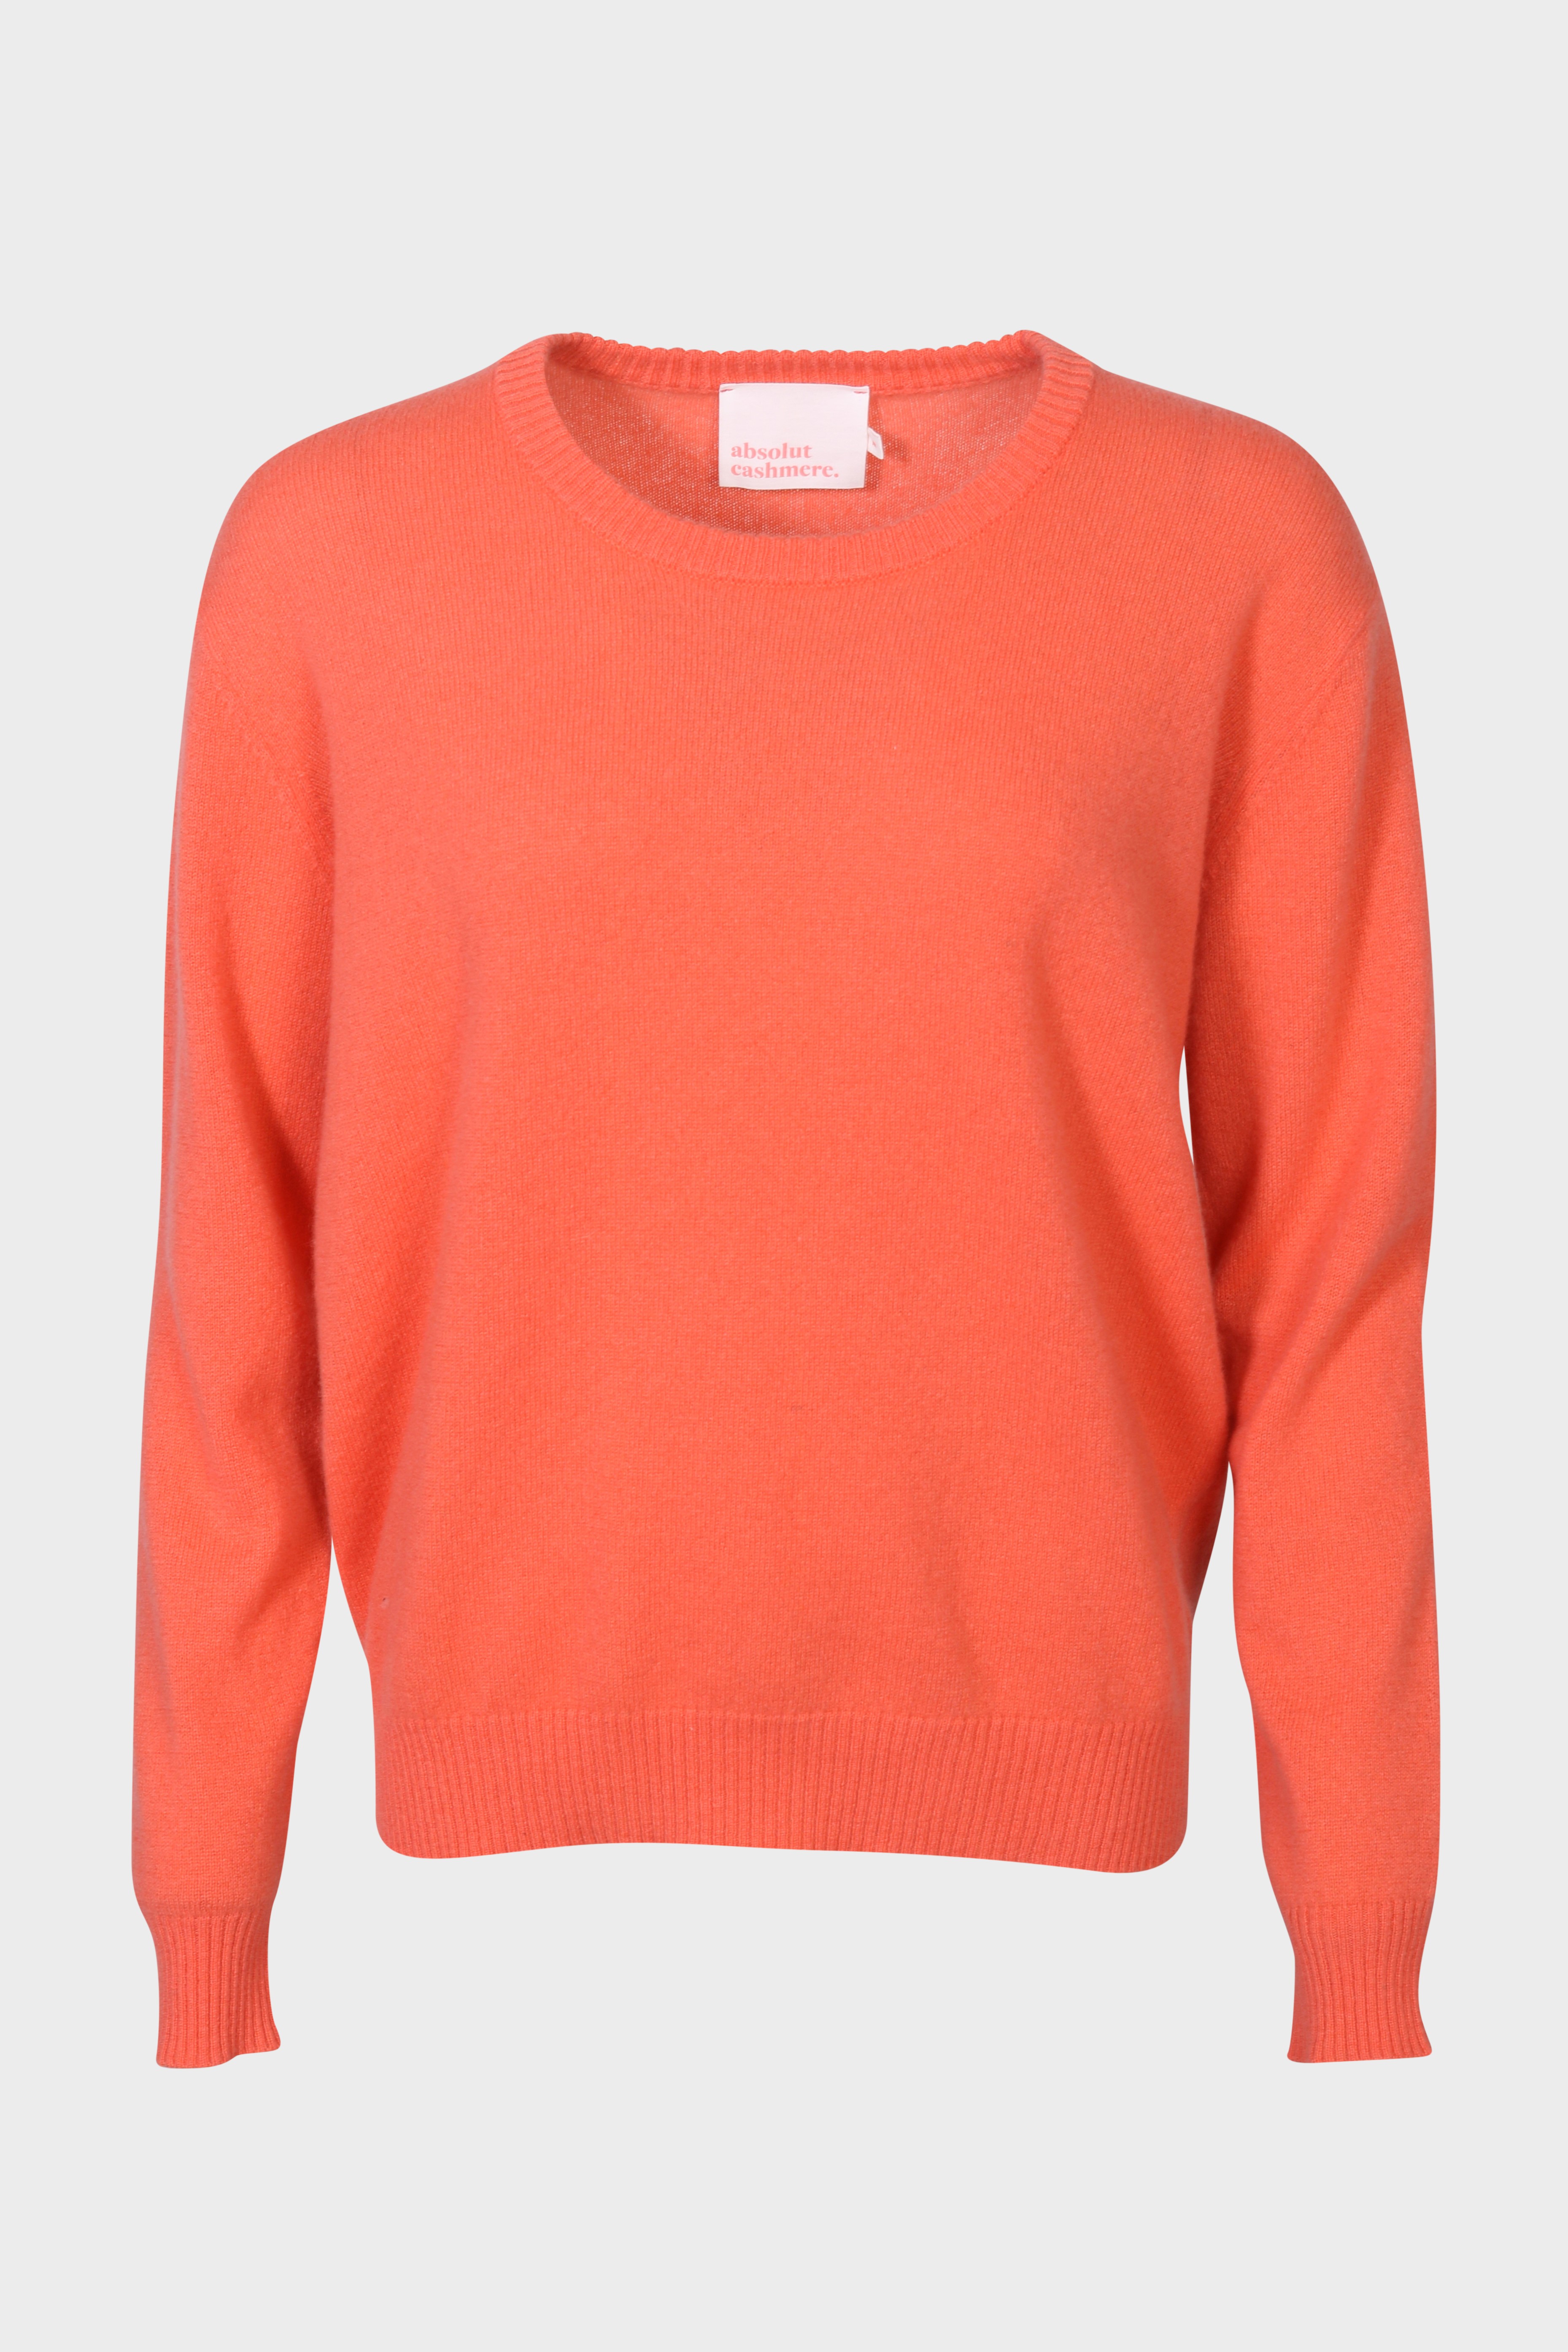 ABSOLUT CASHMERE Sweater Ysee Melon M